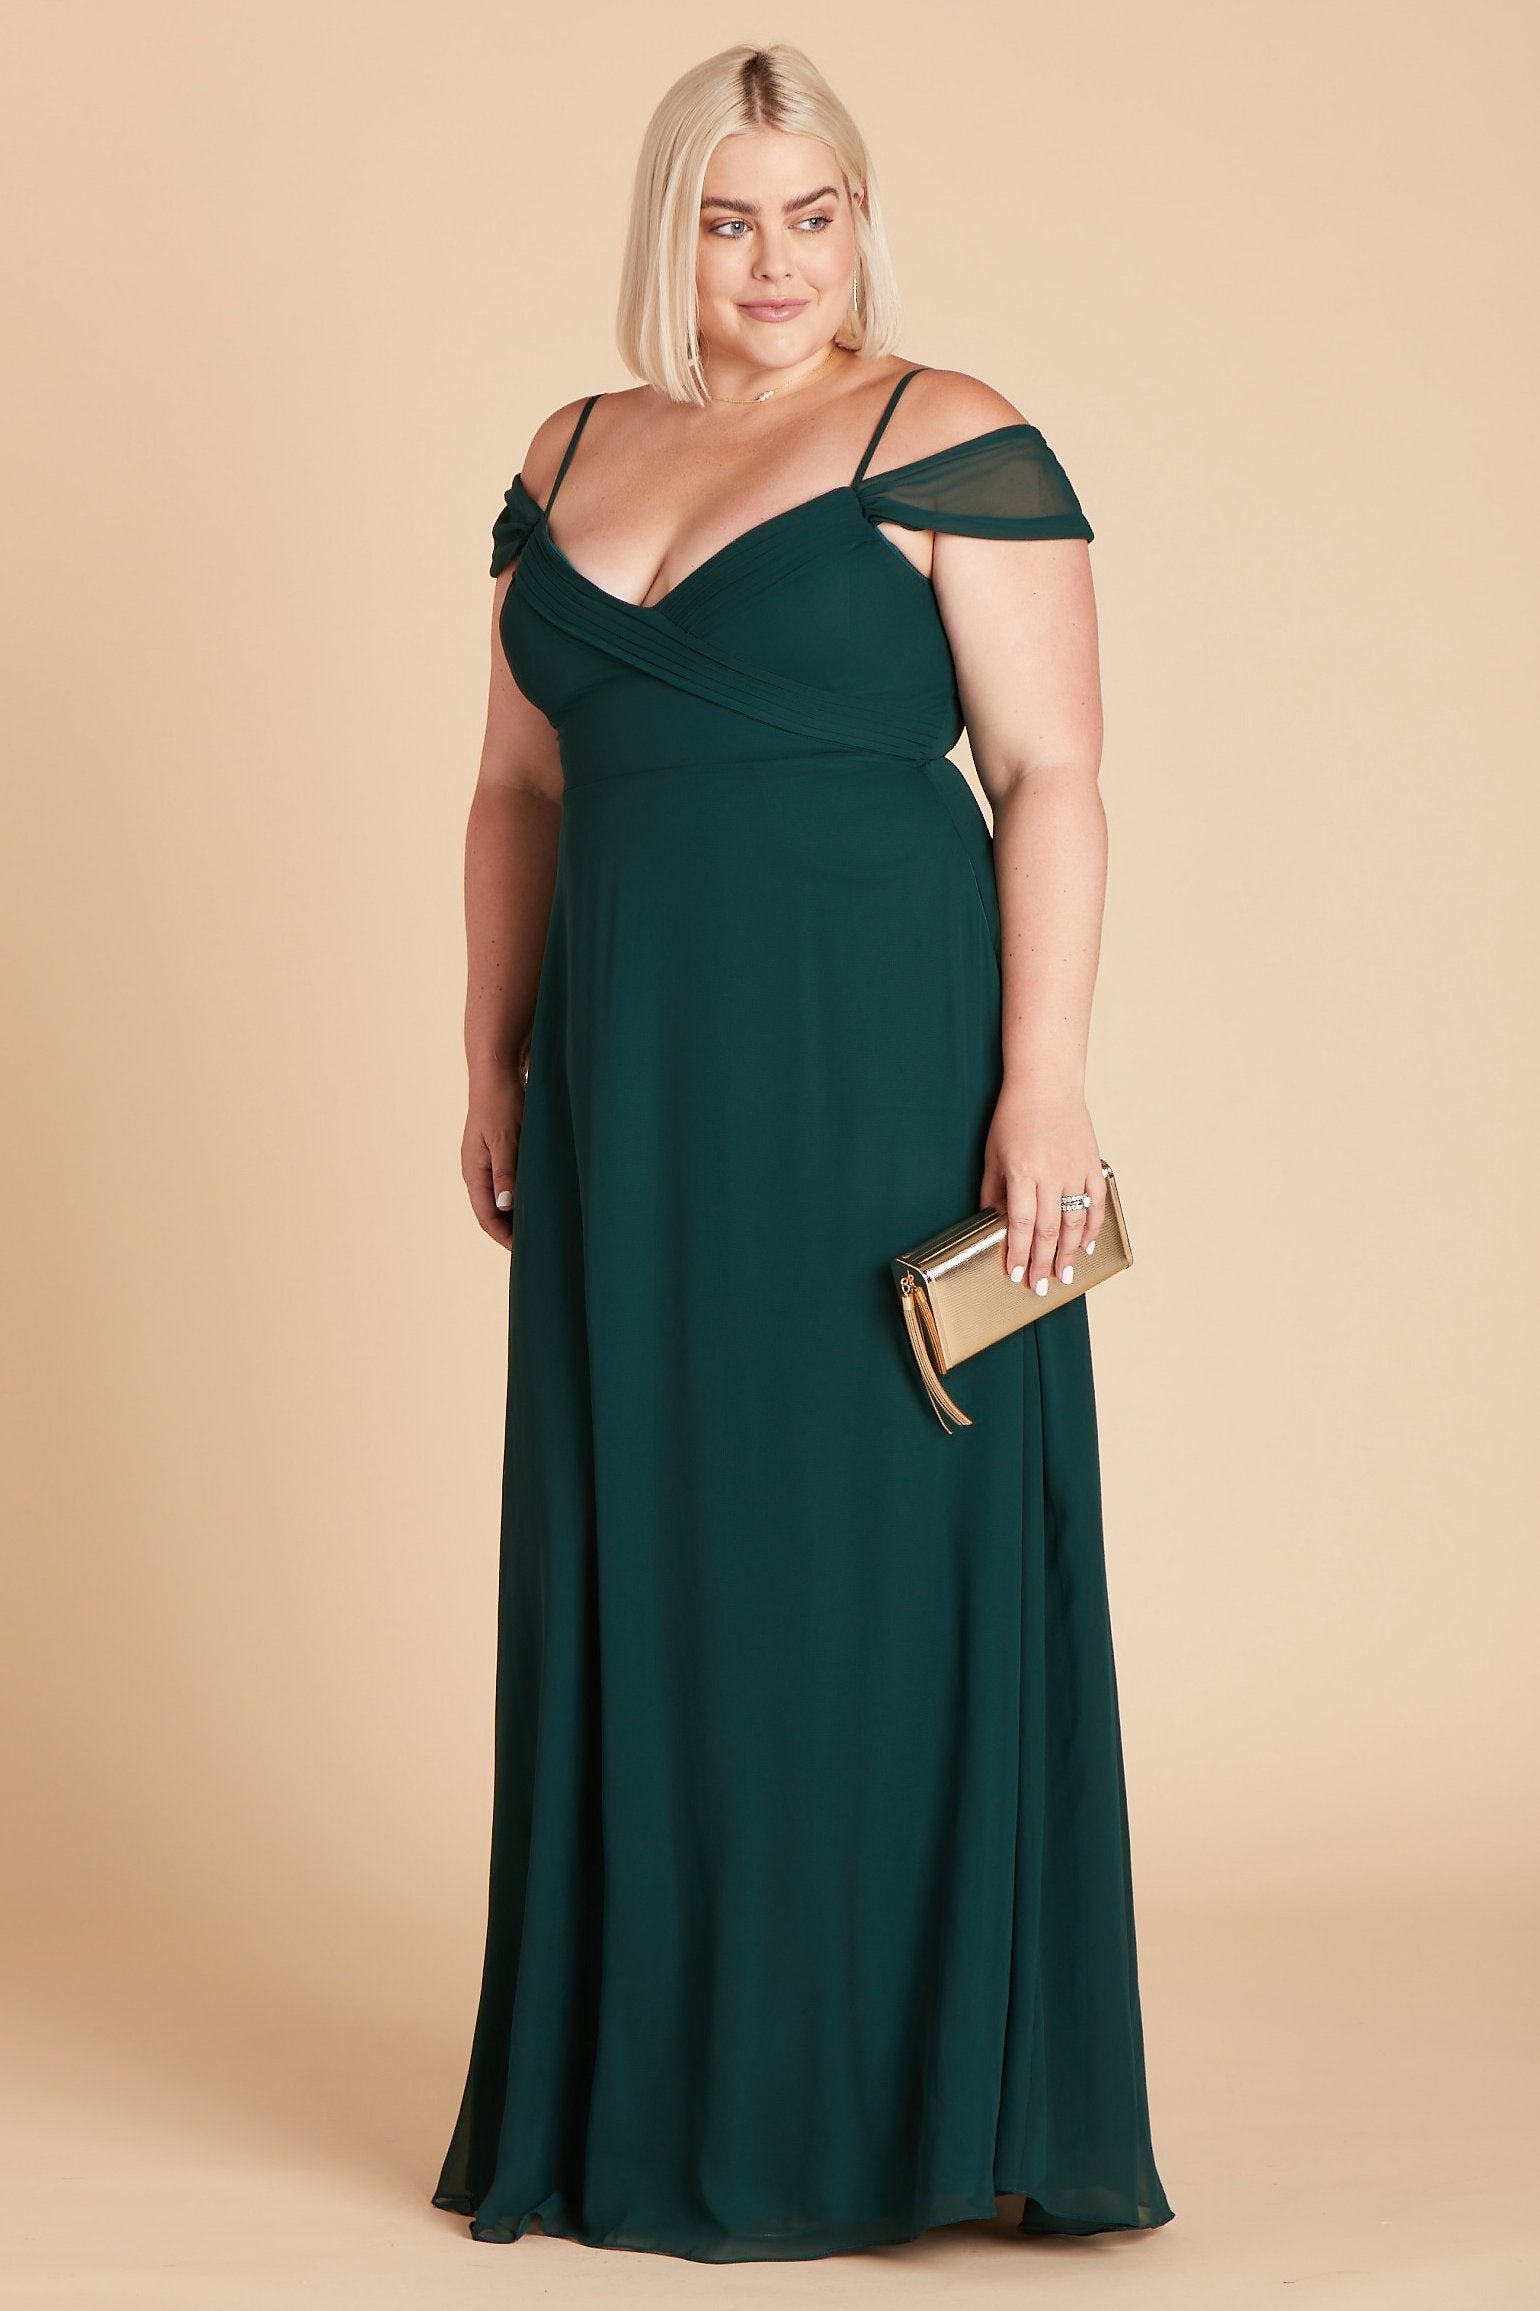 Spence convertible plus size bridesmaid dress in emerald green chiffon by Birdy Grey, front view